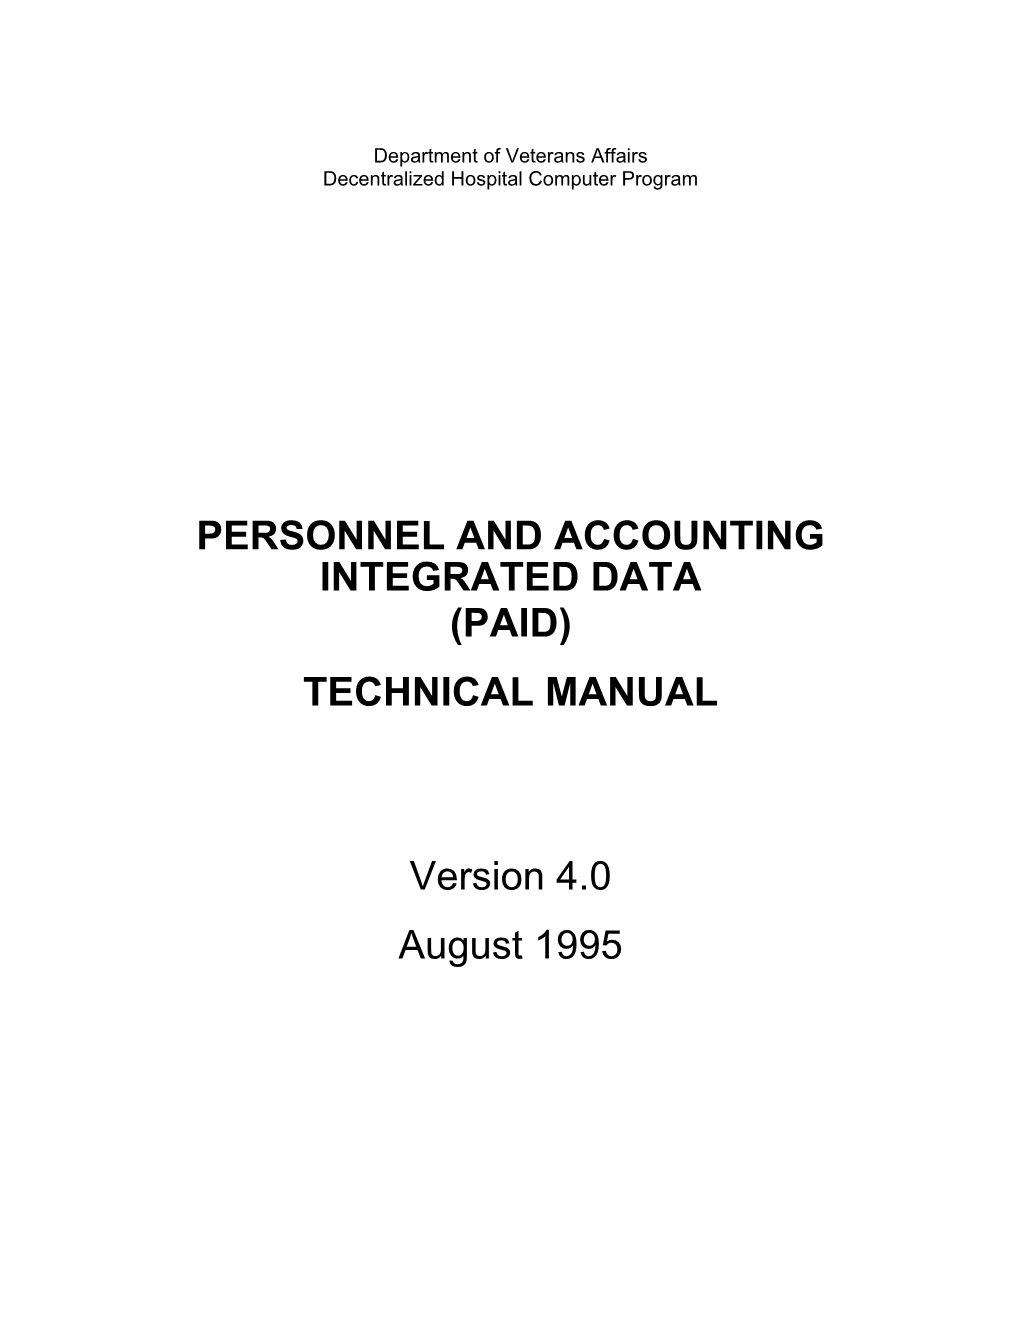 Personnel and Accounting Integrated Data